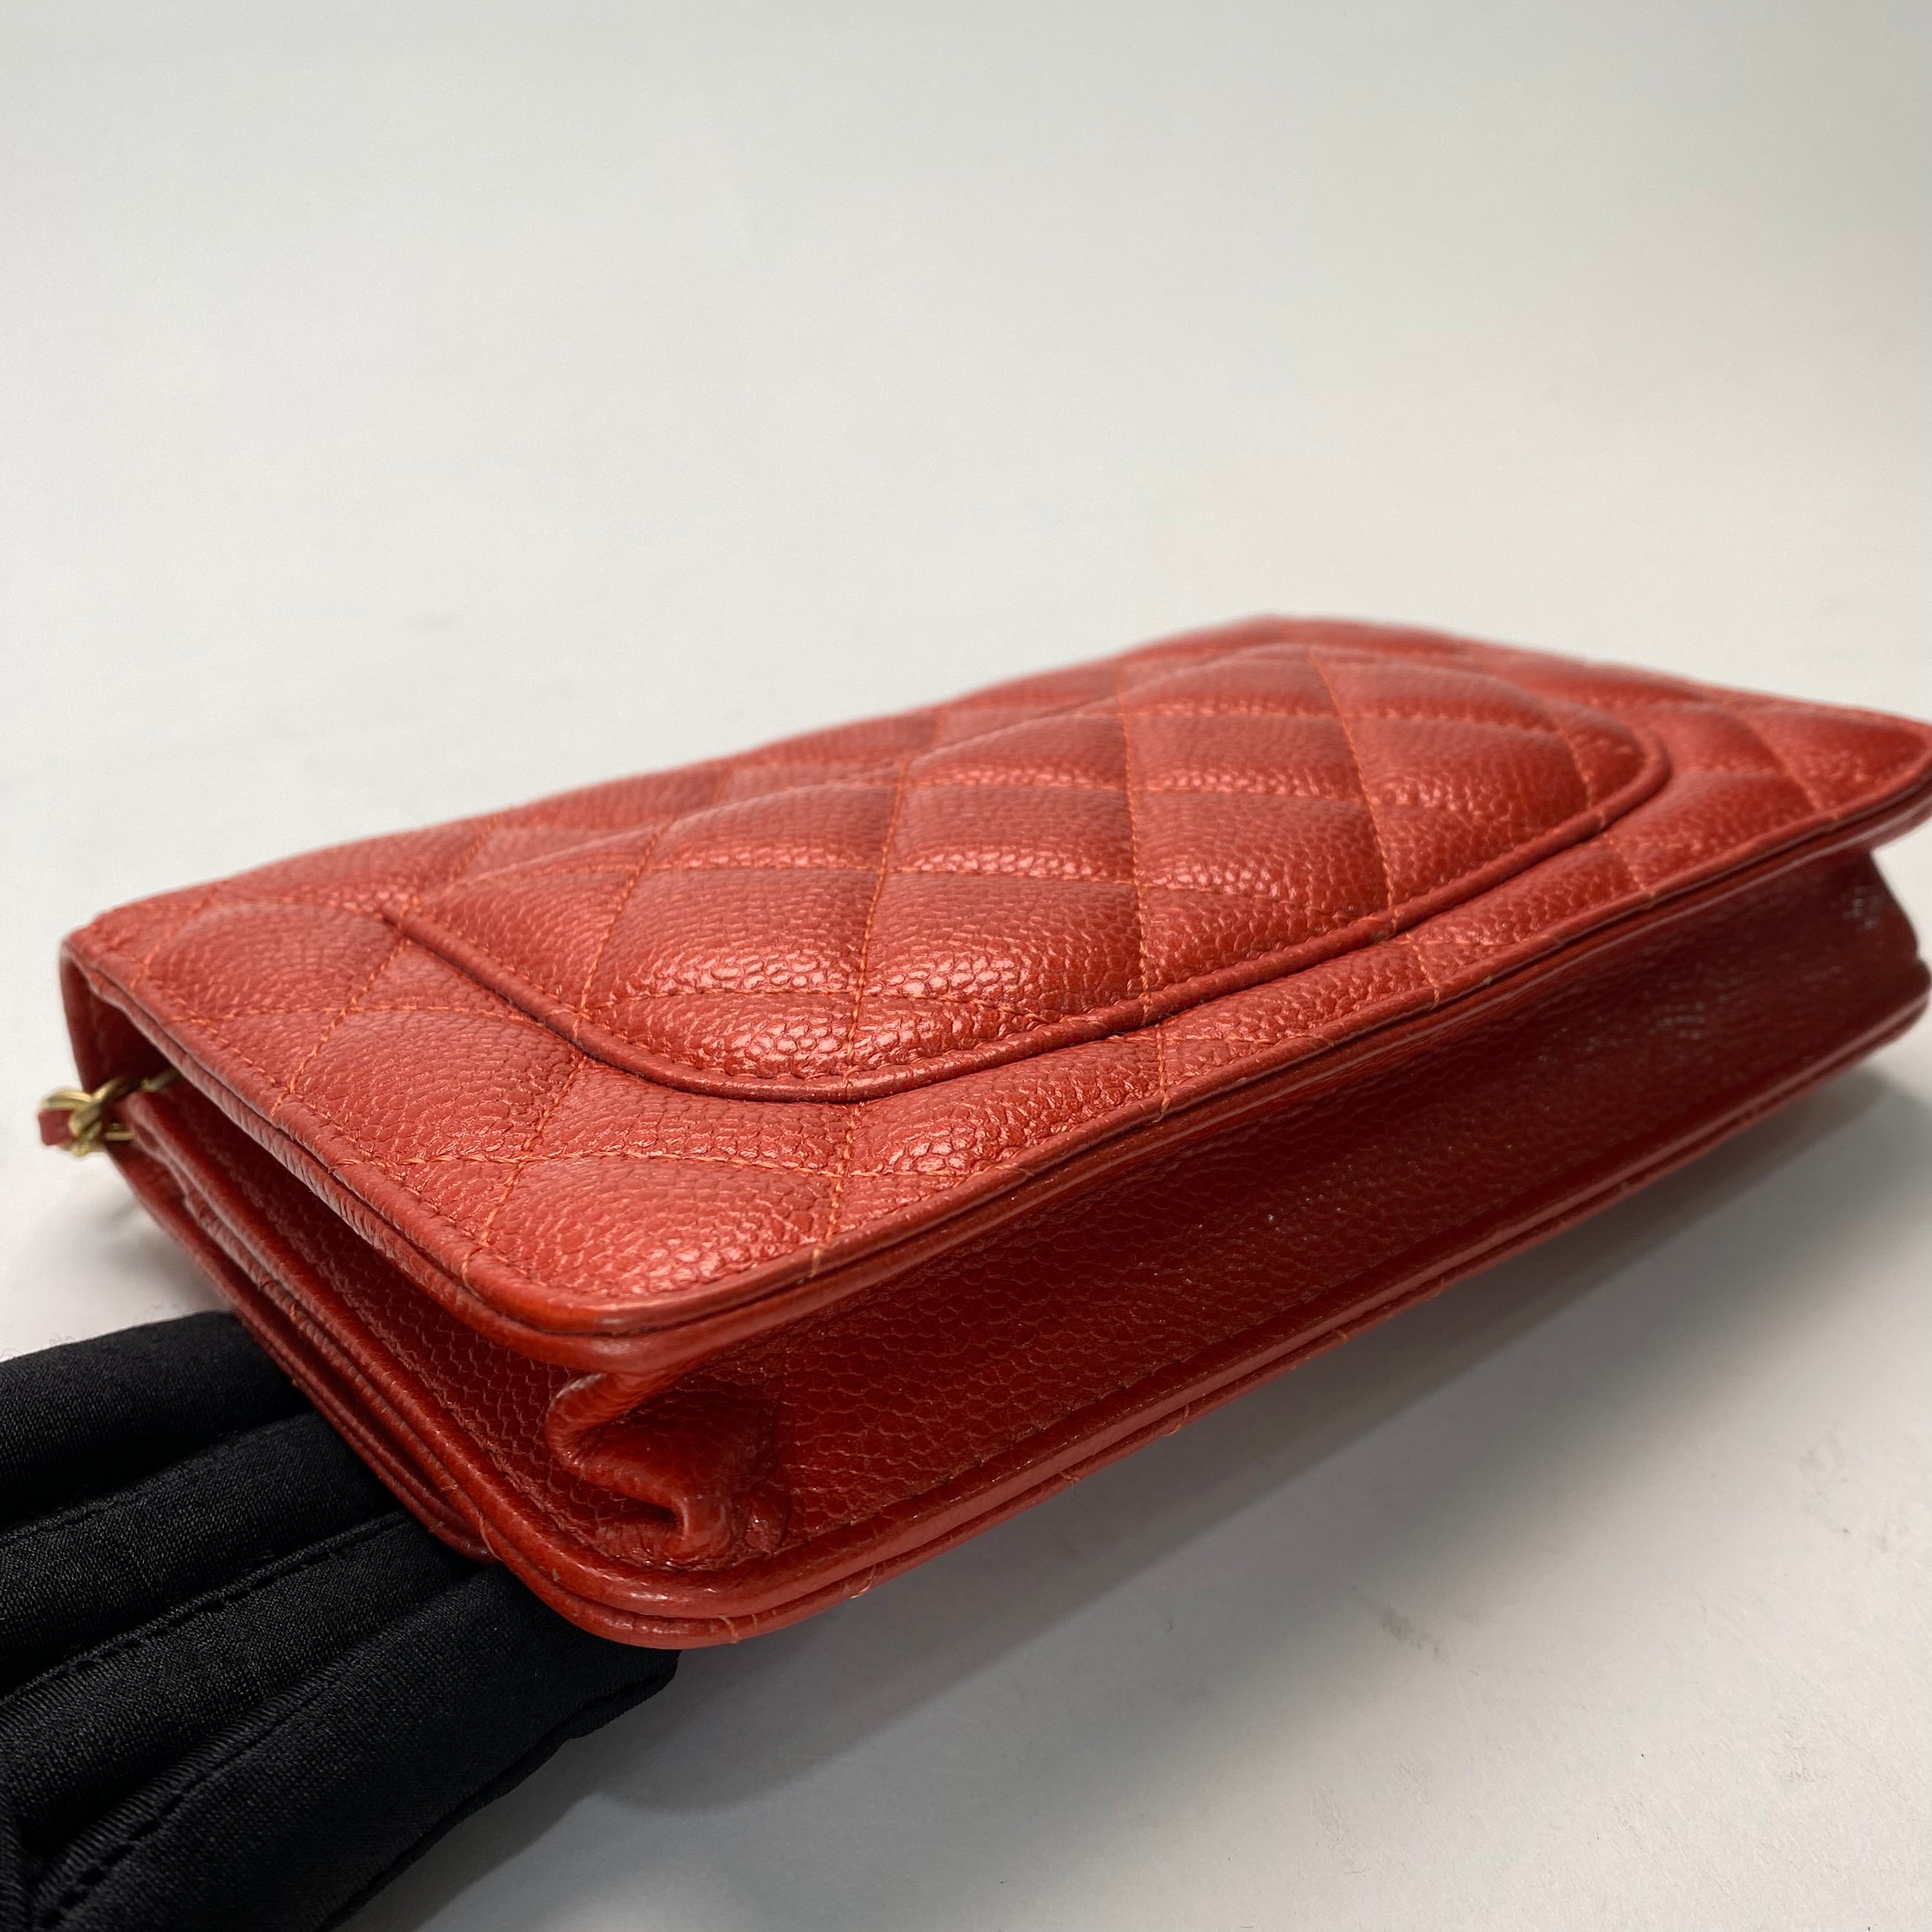 Chanel WOC In Red